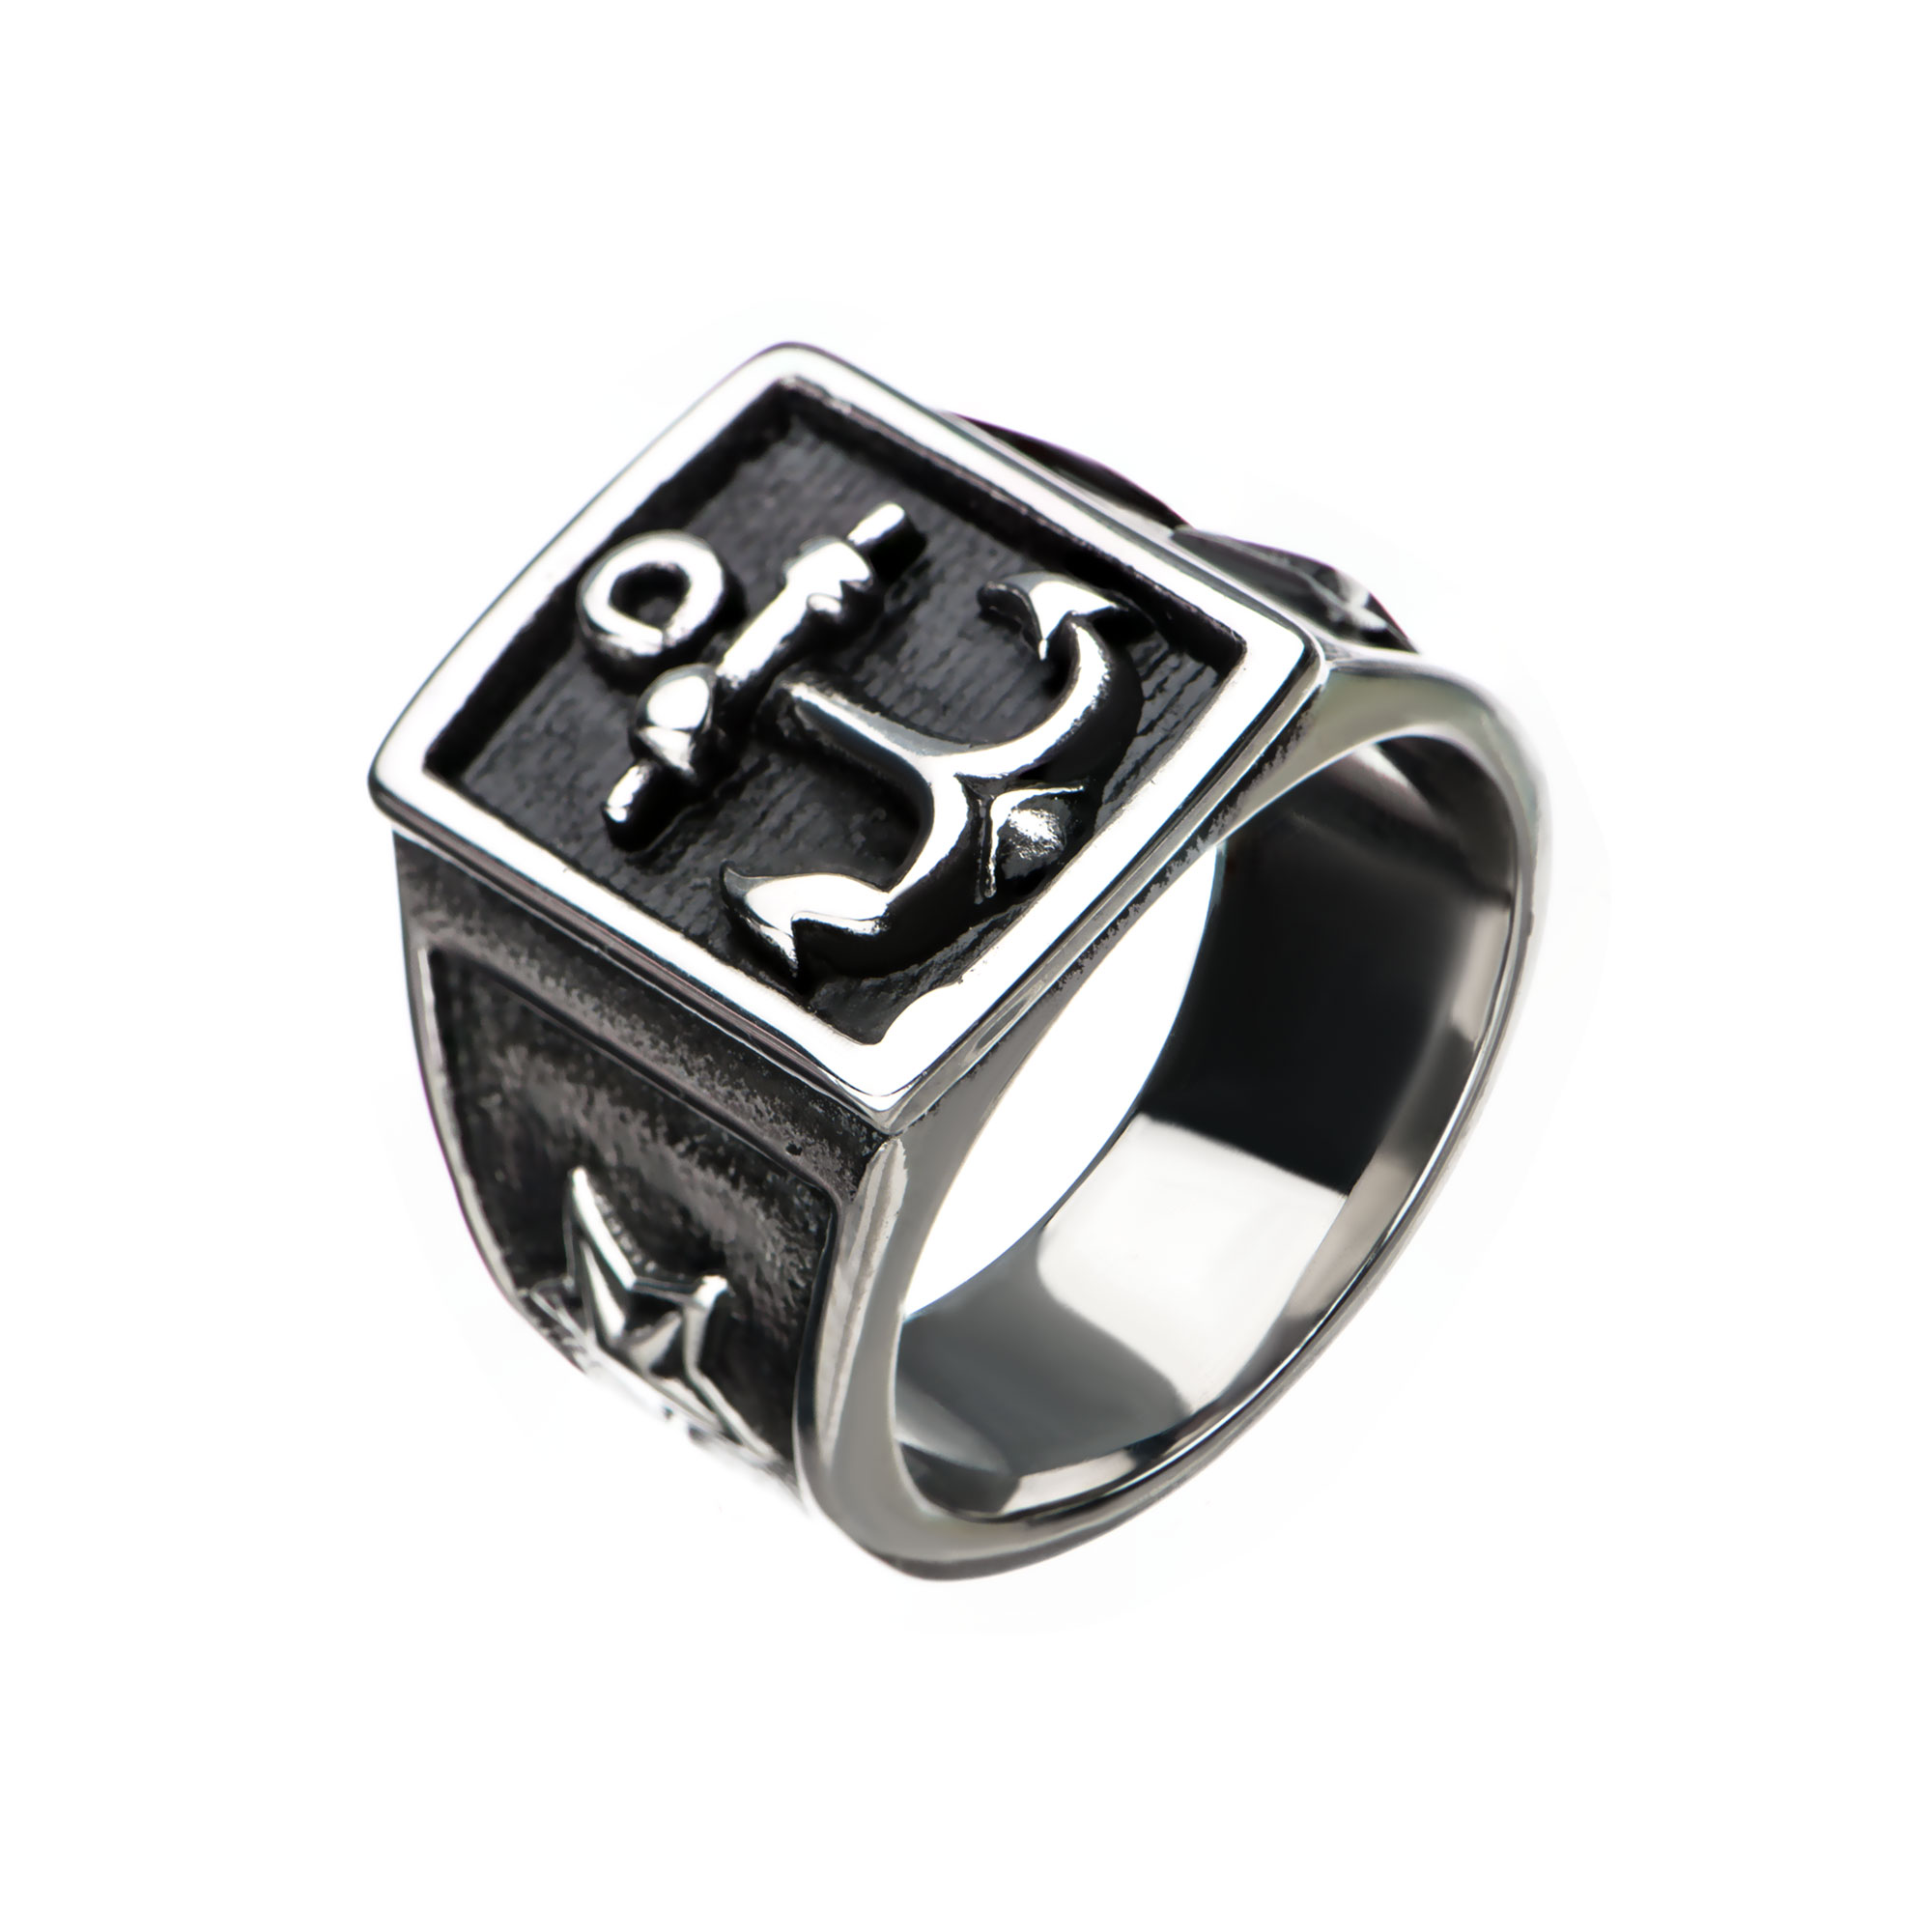 Steel & Black Plated Oxidized Anchor Signet Ring Jayson Jewelers Cape Girardeau, MO